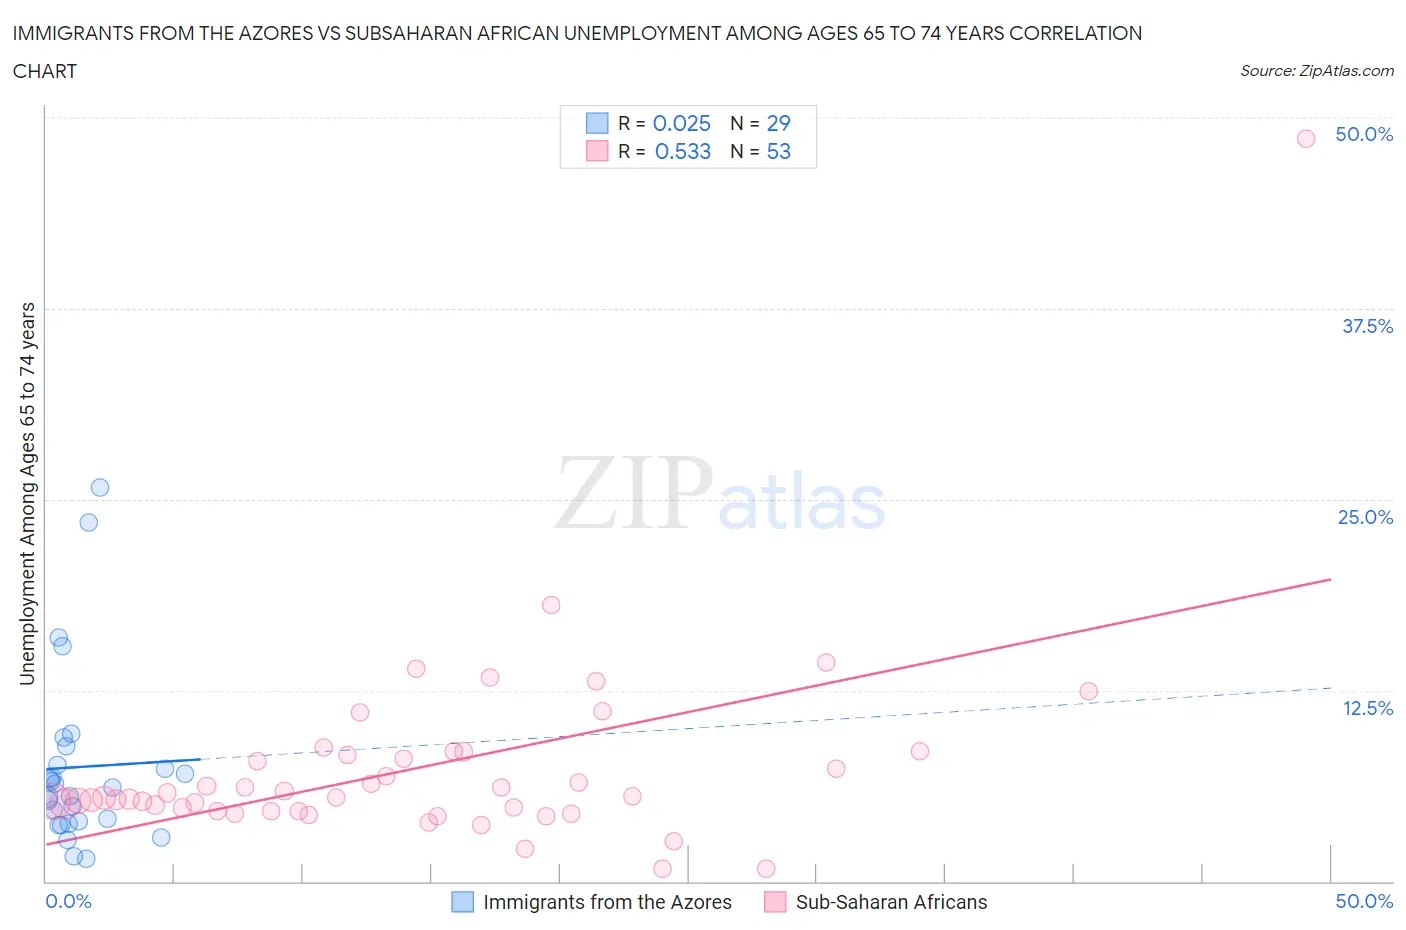 Immigrants from the Azores vs Subsaharan African Unemployment Among Ages 65 to 74 years